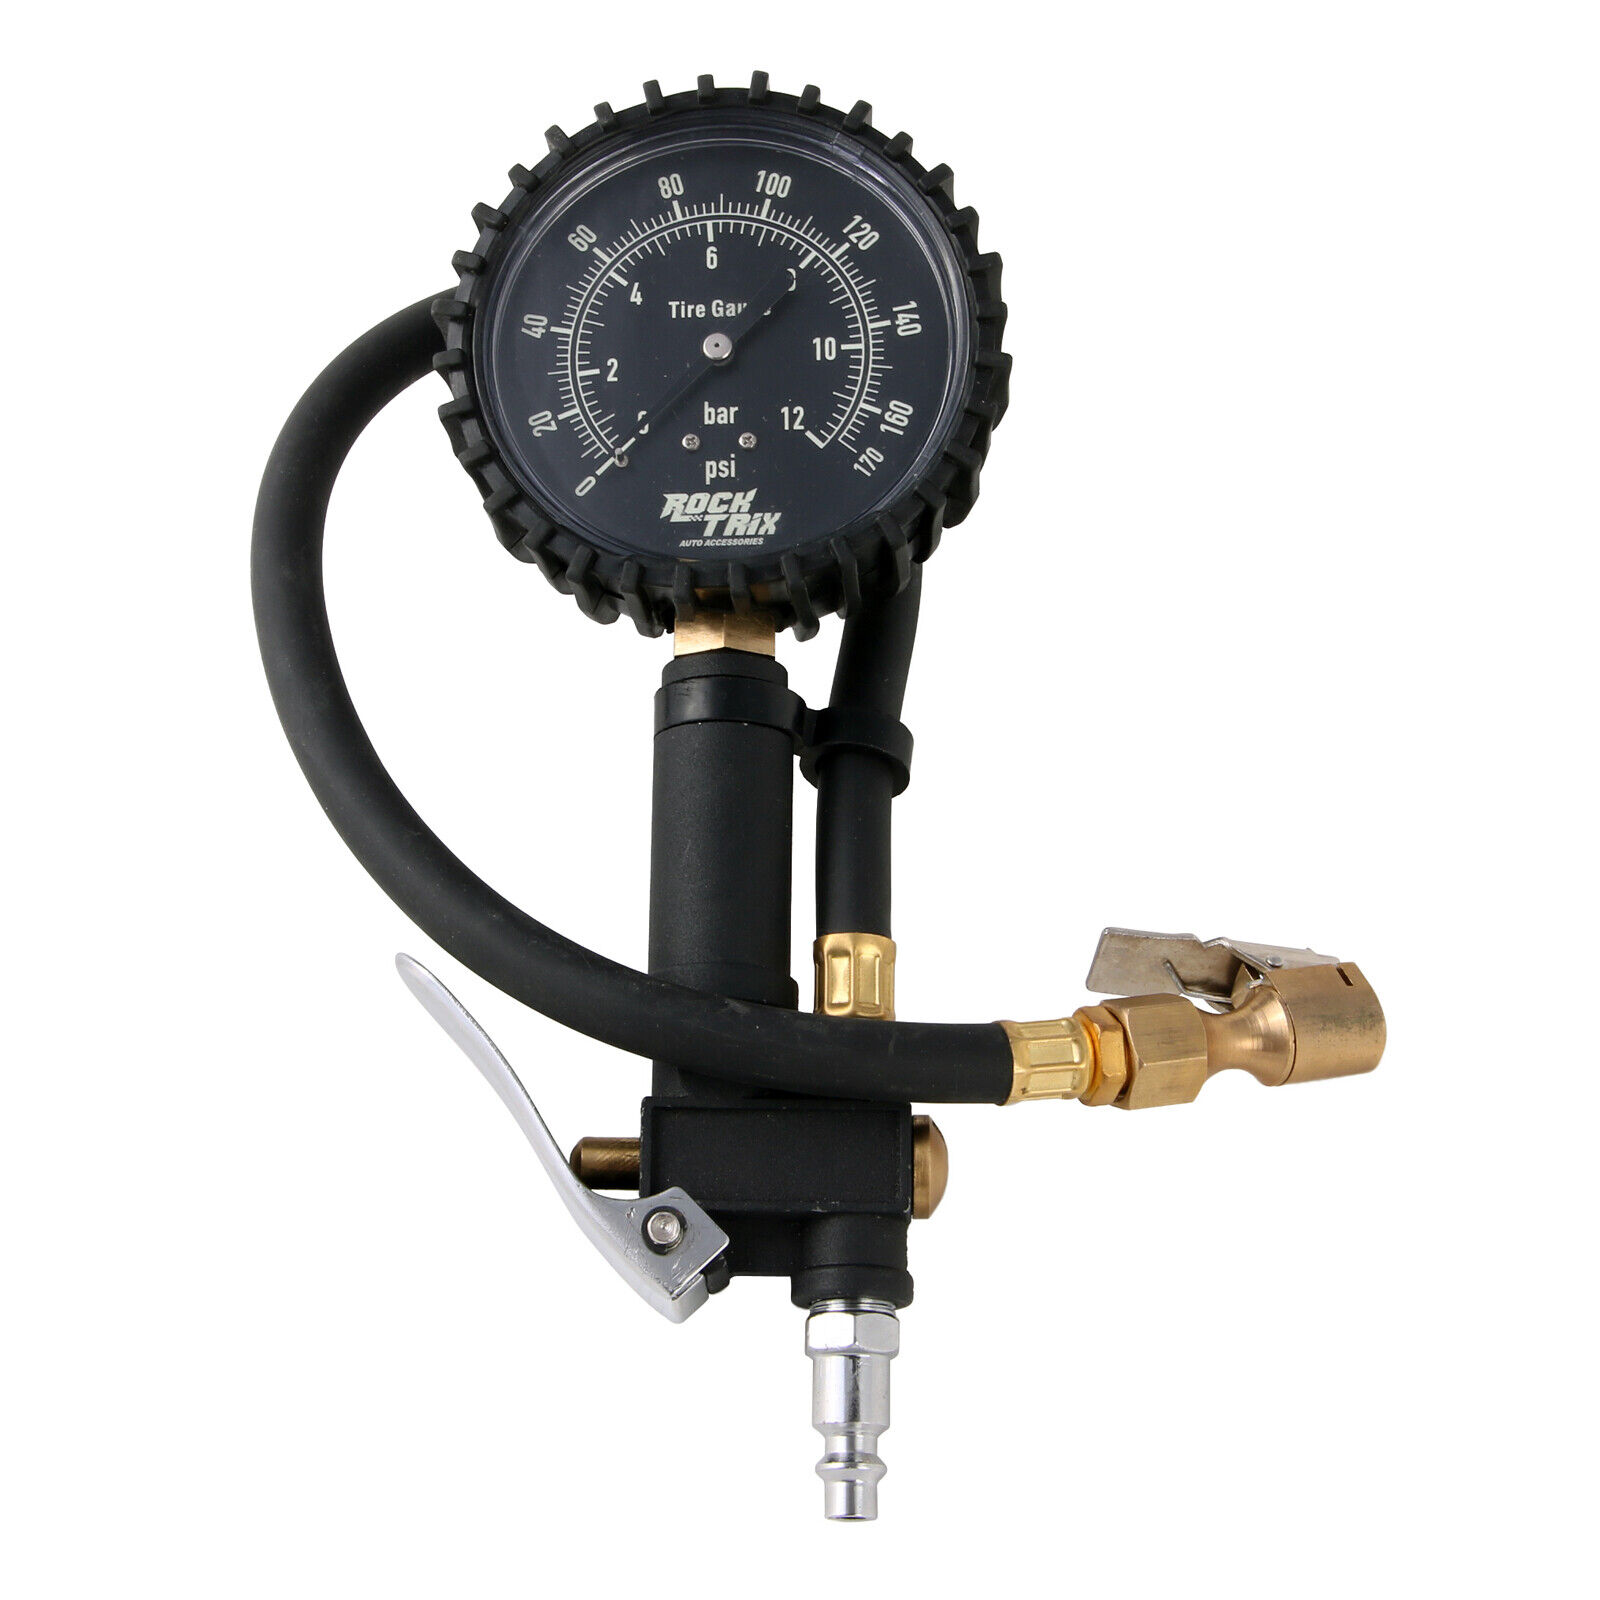 Air Tire Pressure Gauge (High Accuracy) with Inflator (Up to 170 PSI) Mechanical